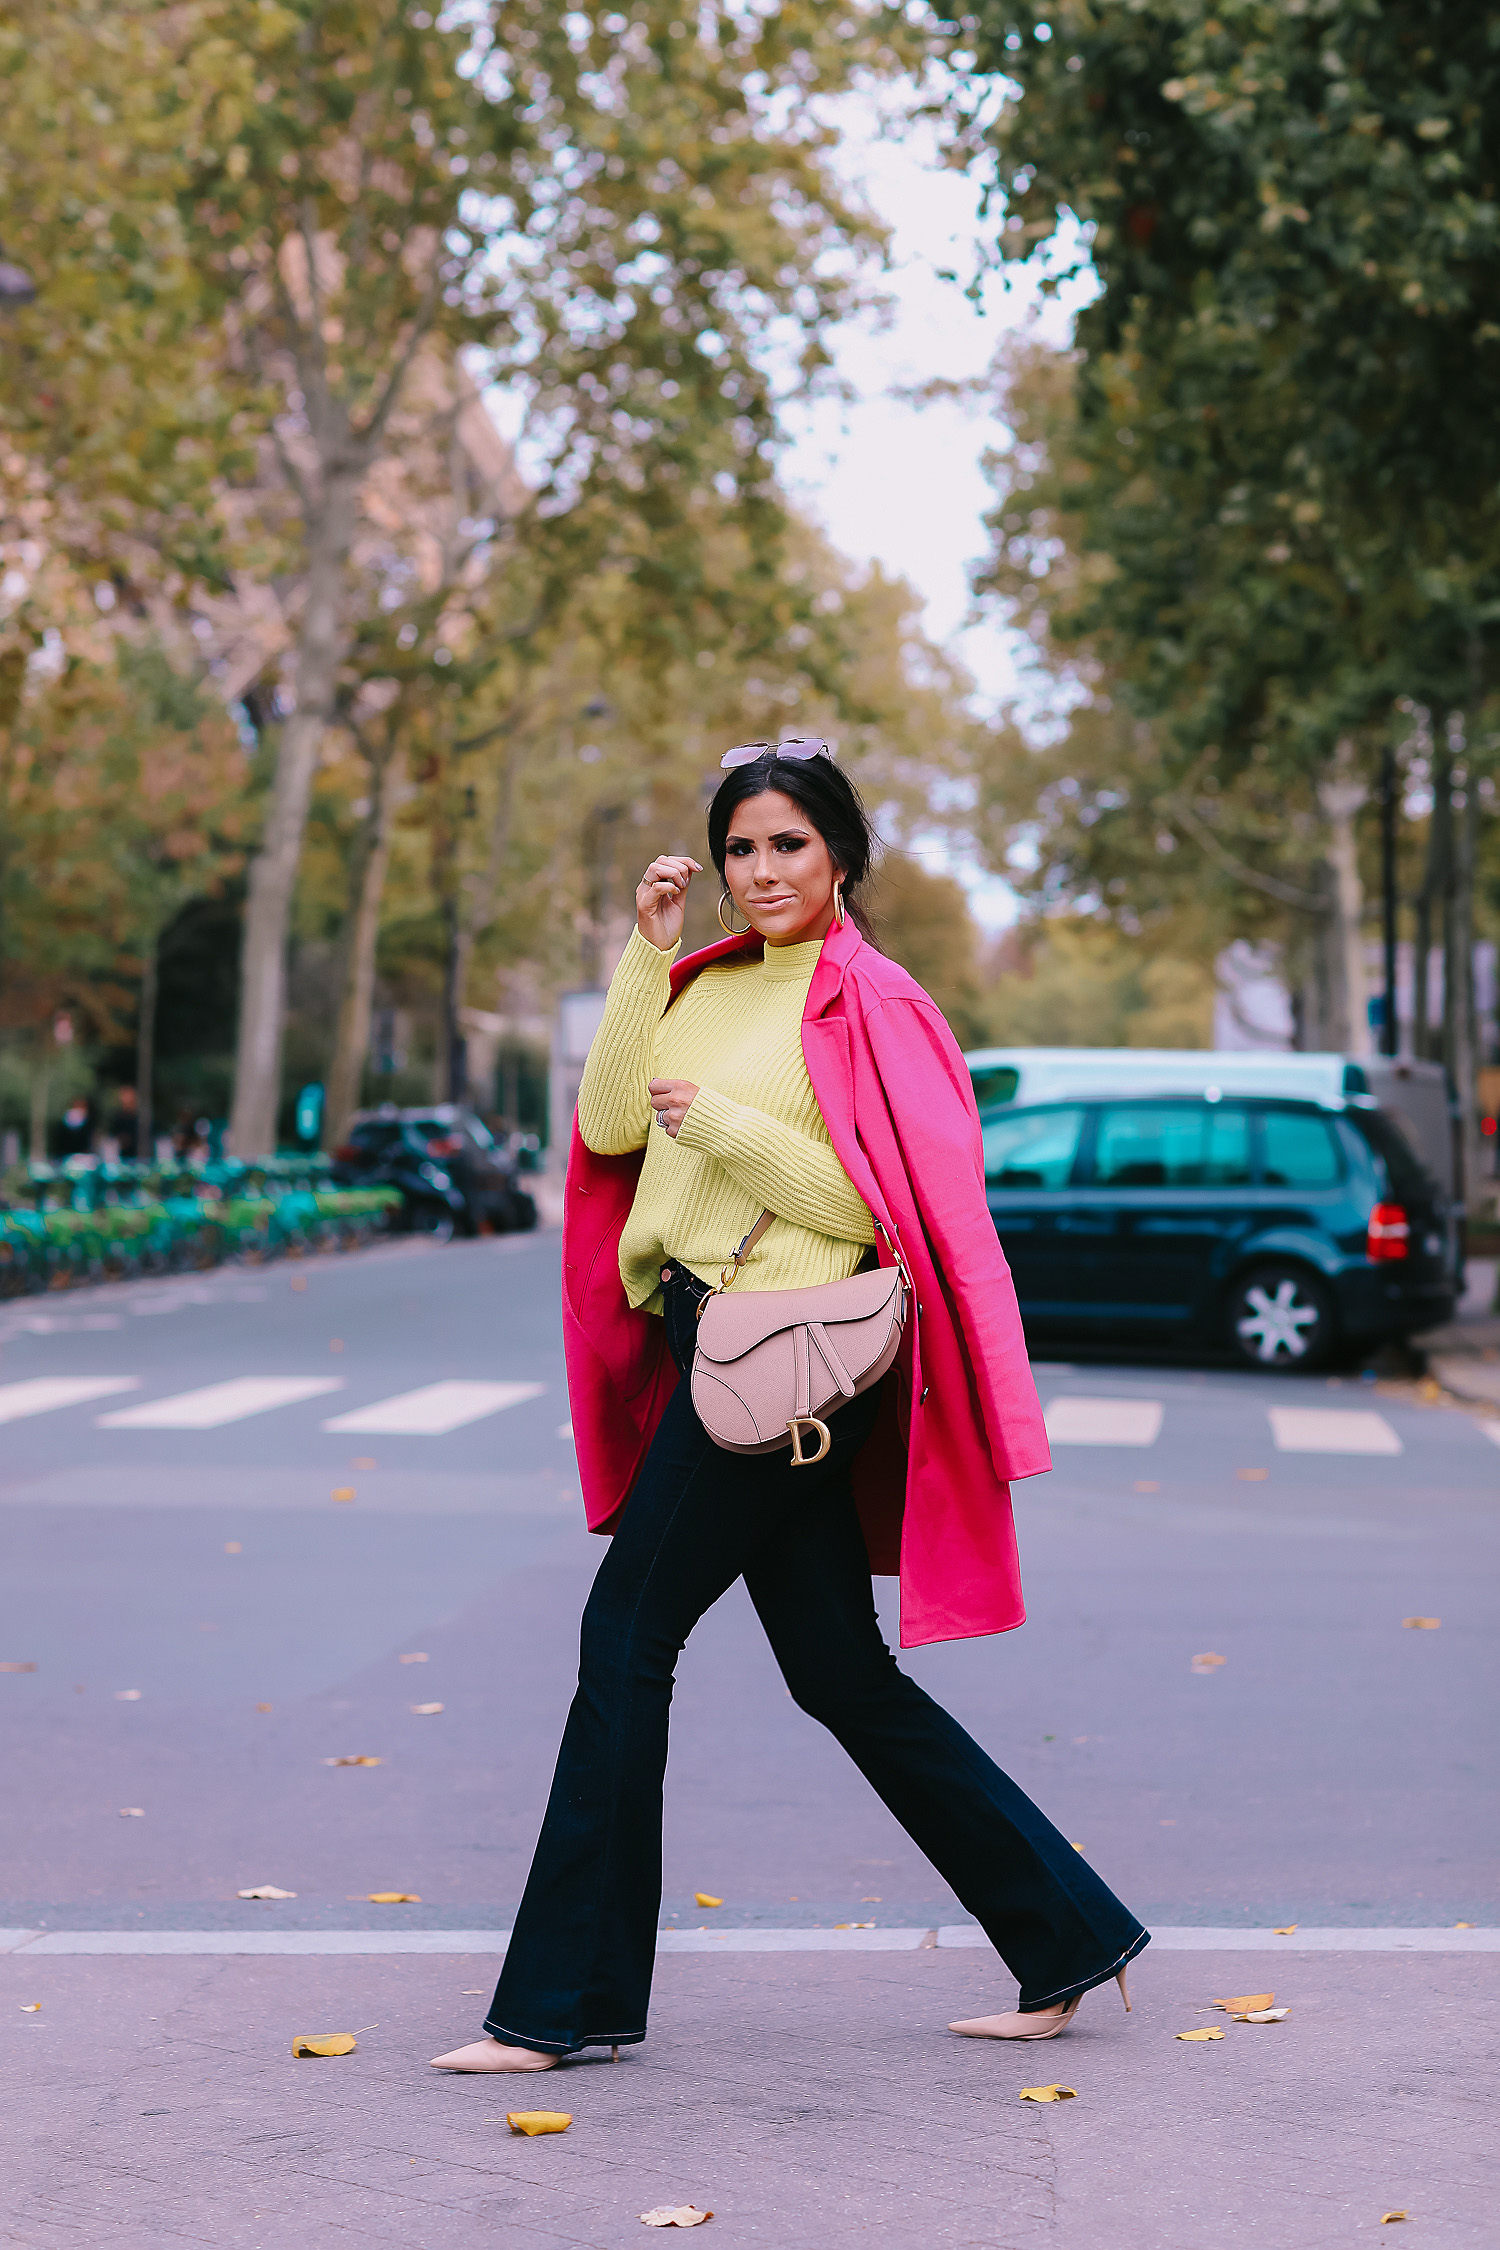 paris fall fashion 2019, fall fashion 2019, banana republic fall outfits 2019, paris outfit ideas fall and winter, what to wear in paris in october november, emily ann gemma-2 | paris fall fashion 2019, fall fashion 2019, banana republic fall outfits 2019, paris outfit ideas fall and winter, what to wear in paris in october november, emily ann gemma-2 | Do You Like Neon Or Neutrals?! Two Everyday Fall Outfits by popular Oklahoma fashion blog, The Sweetest Thing: image of a woman outside in Paris and wearing a Banana Republic High-Rise Flare Jean, Banana Republic Double-Faced Topcoat, and Banana Republic Chunky High Crew-Neck Sweater.